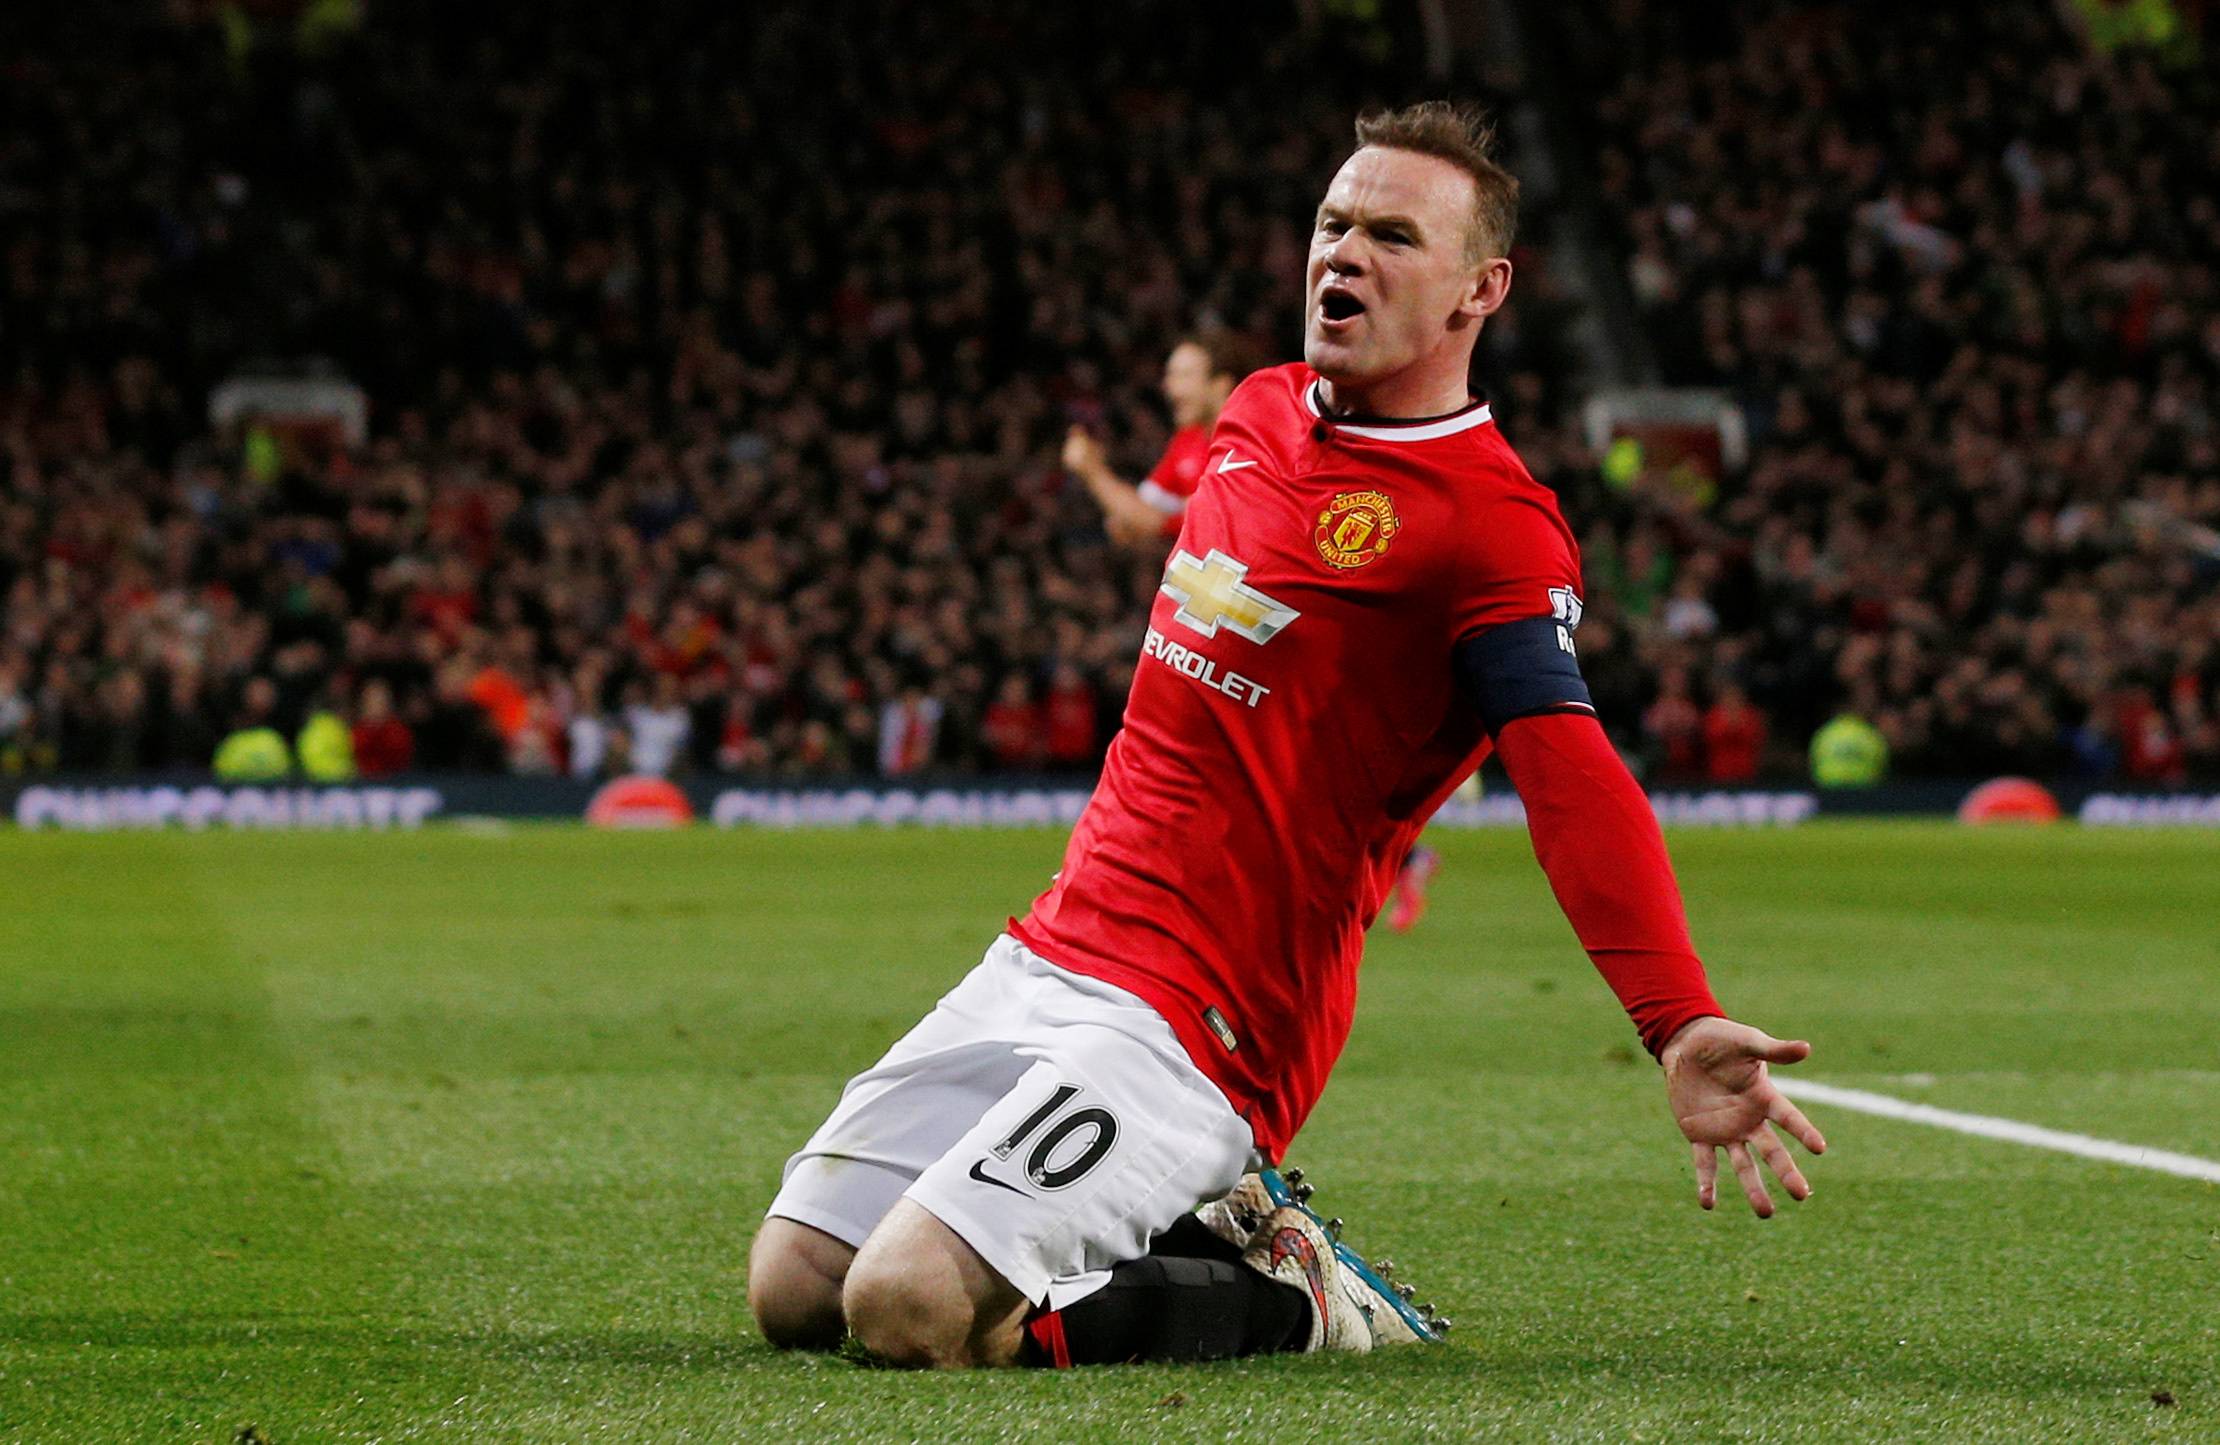 Manchester United's Wayne Rooney celebrates scoring their first goal Action Images via Reuters / Jason Cairnduff